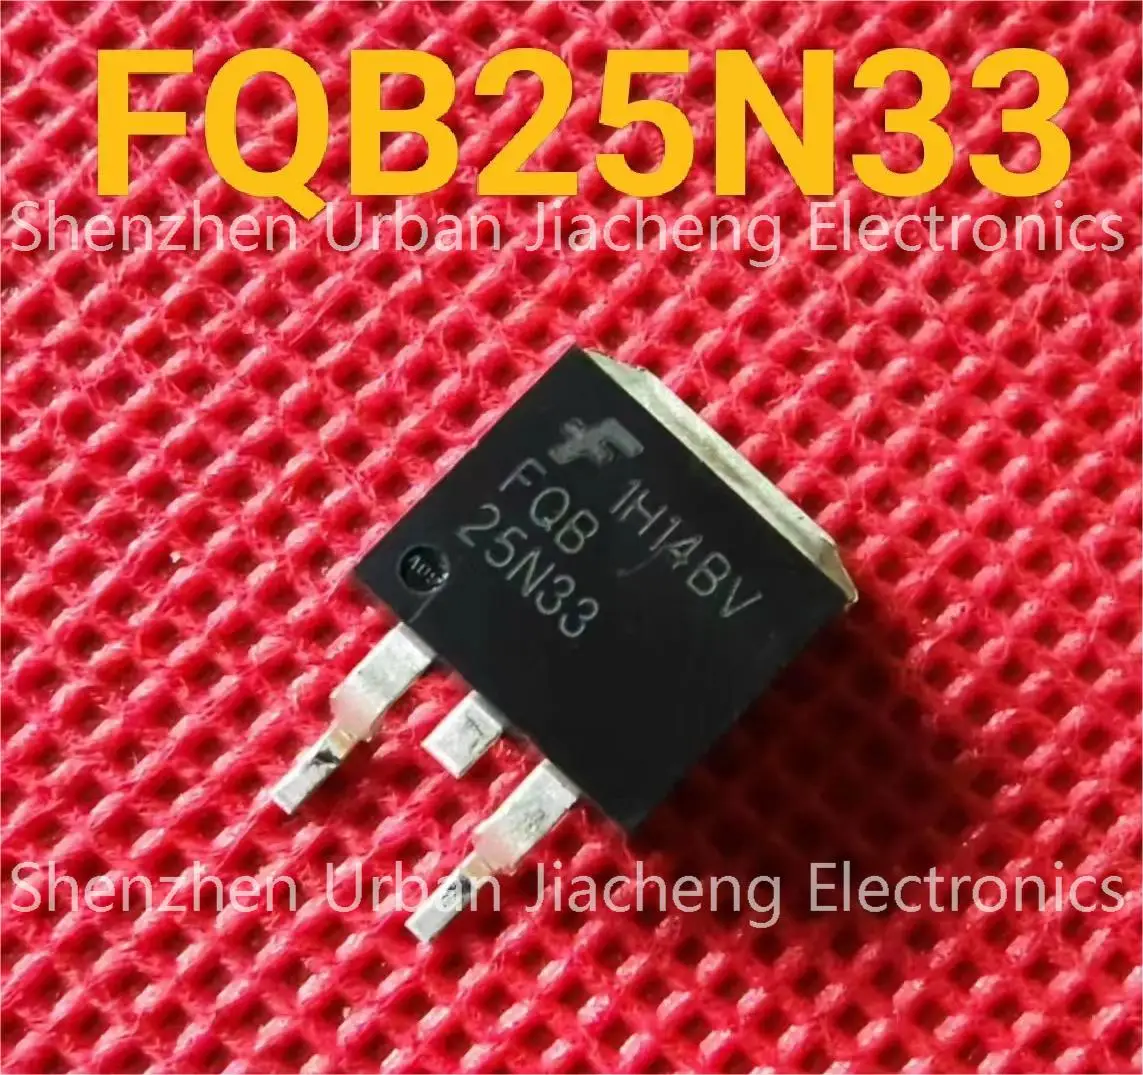 

10PCS/LOT 25N33 FQB25N33 TO-263 Field Effect MOSFET 25A 330V Imported Original Best Quality In Stock Free shipping